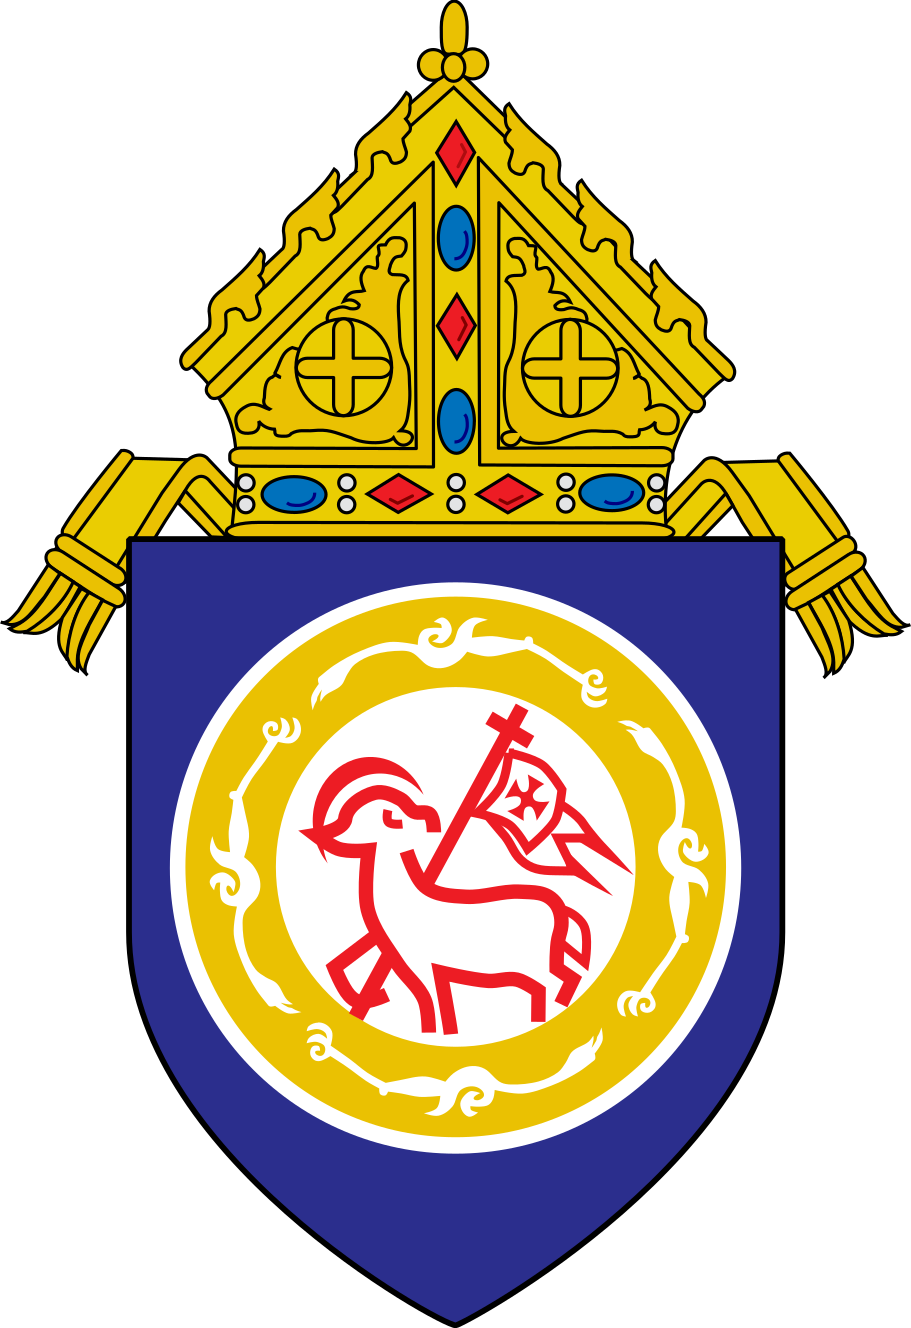 Tower clipart coat arm. Roman catholic diocese of